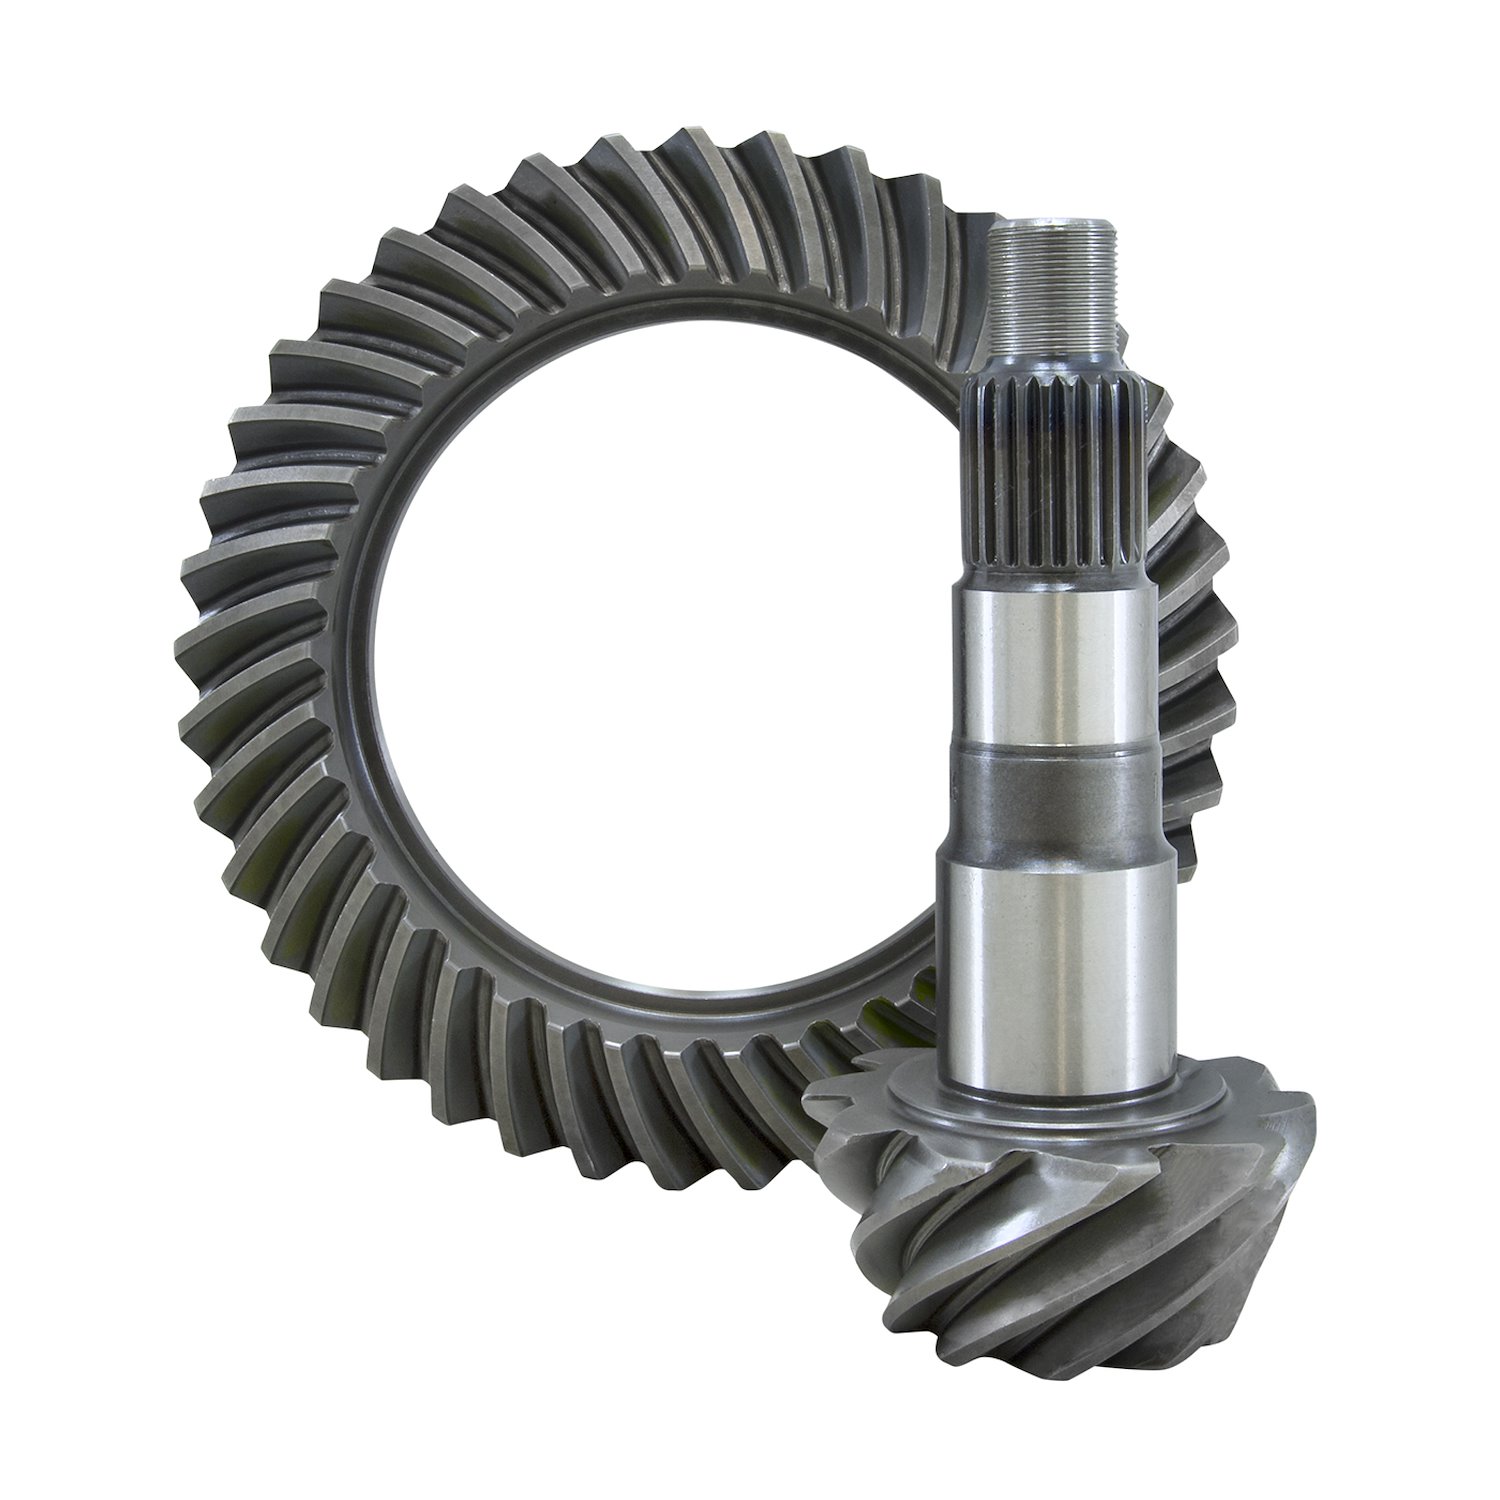 USA Standard ZG D44R-456R Ring & Pinion Replacement